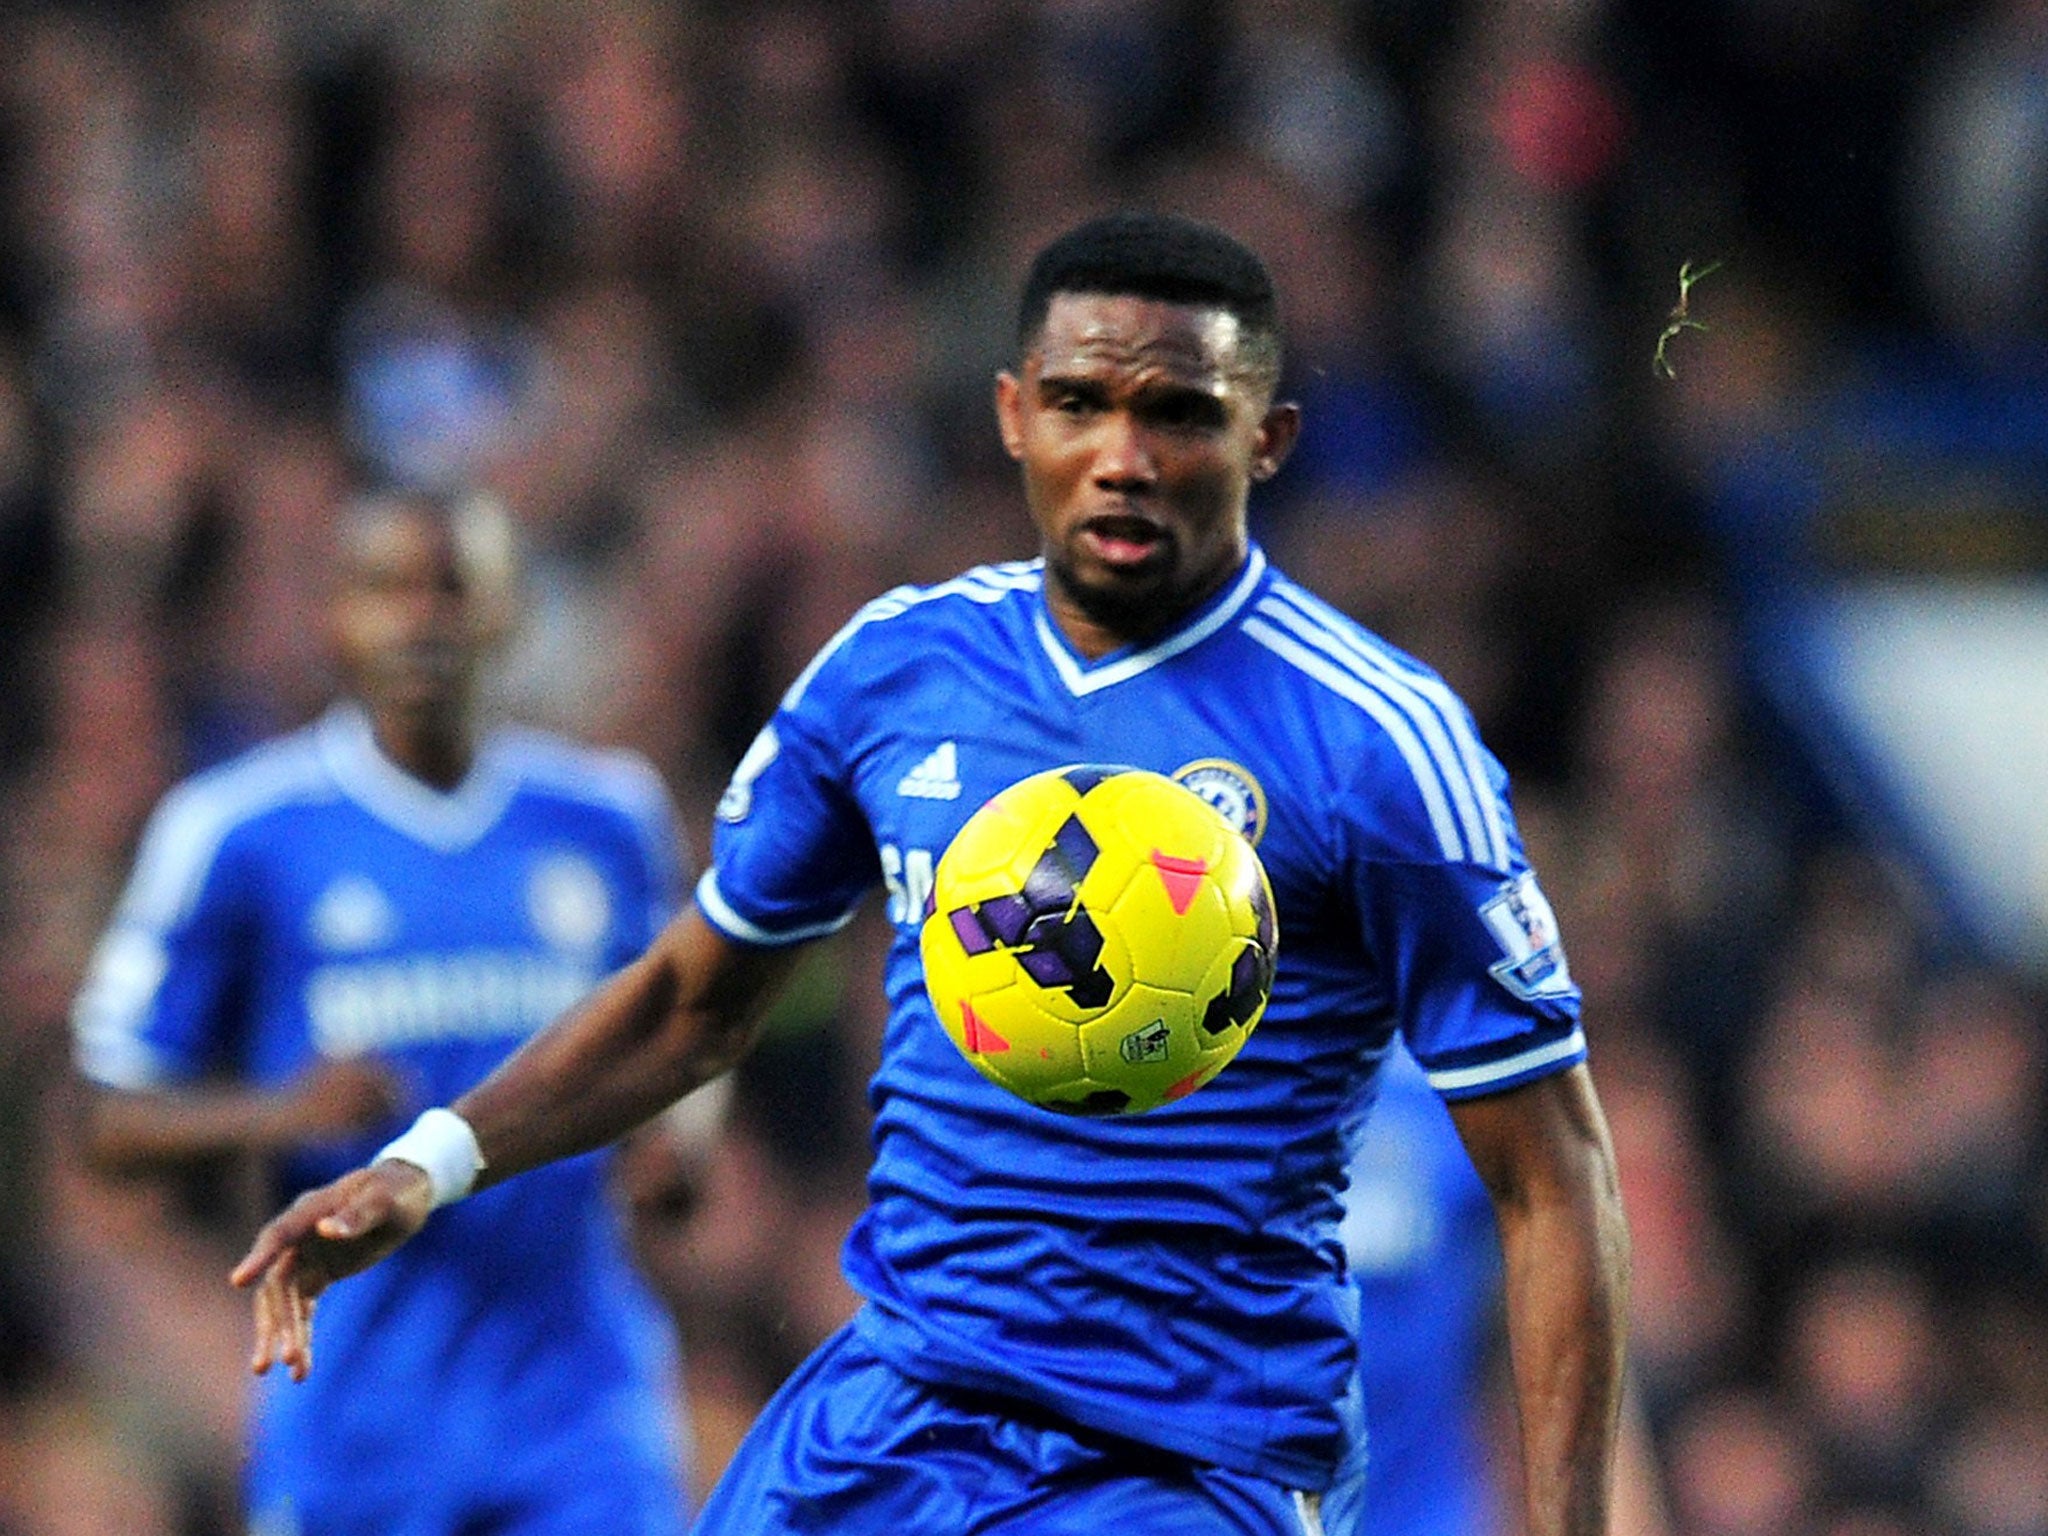 Samuel Eto'o scored a hat-trick to beat Manchester United